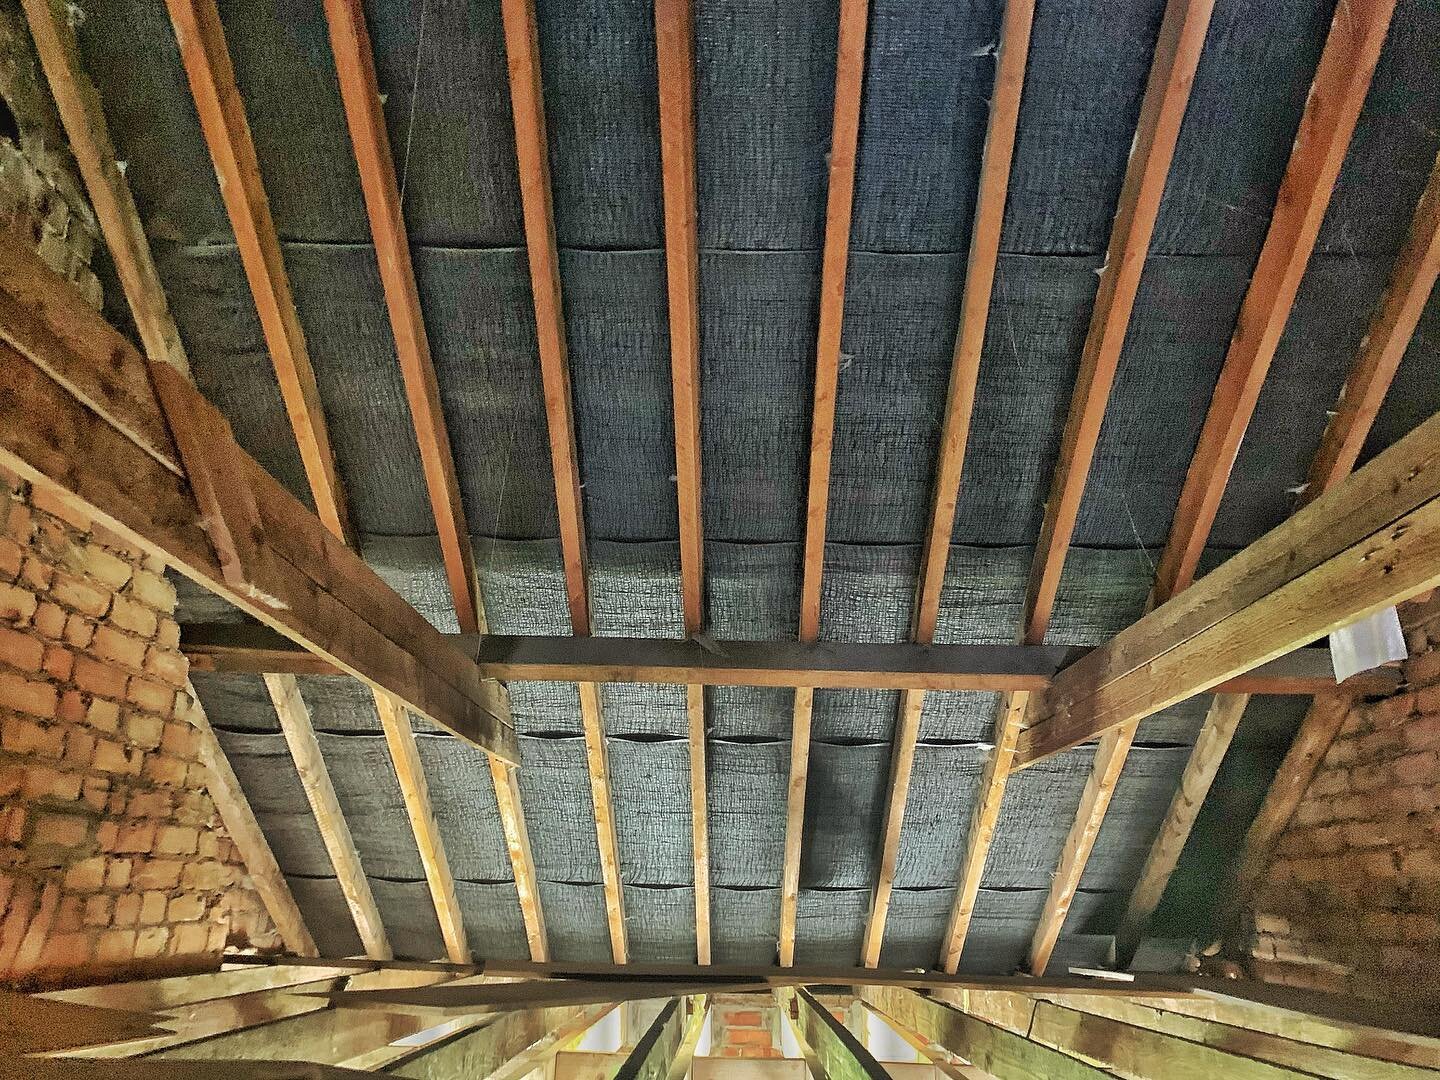 Traditional timber roof prior to conversion into a habitable room

#loft #loftconversion #roofspace #timber #structuralengineering